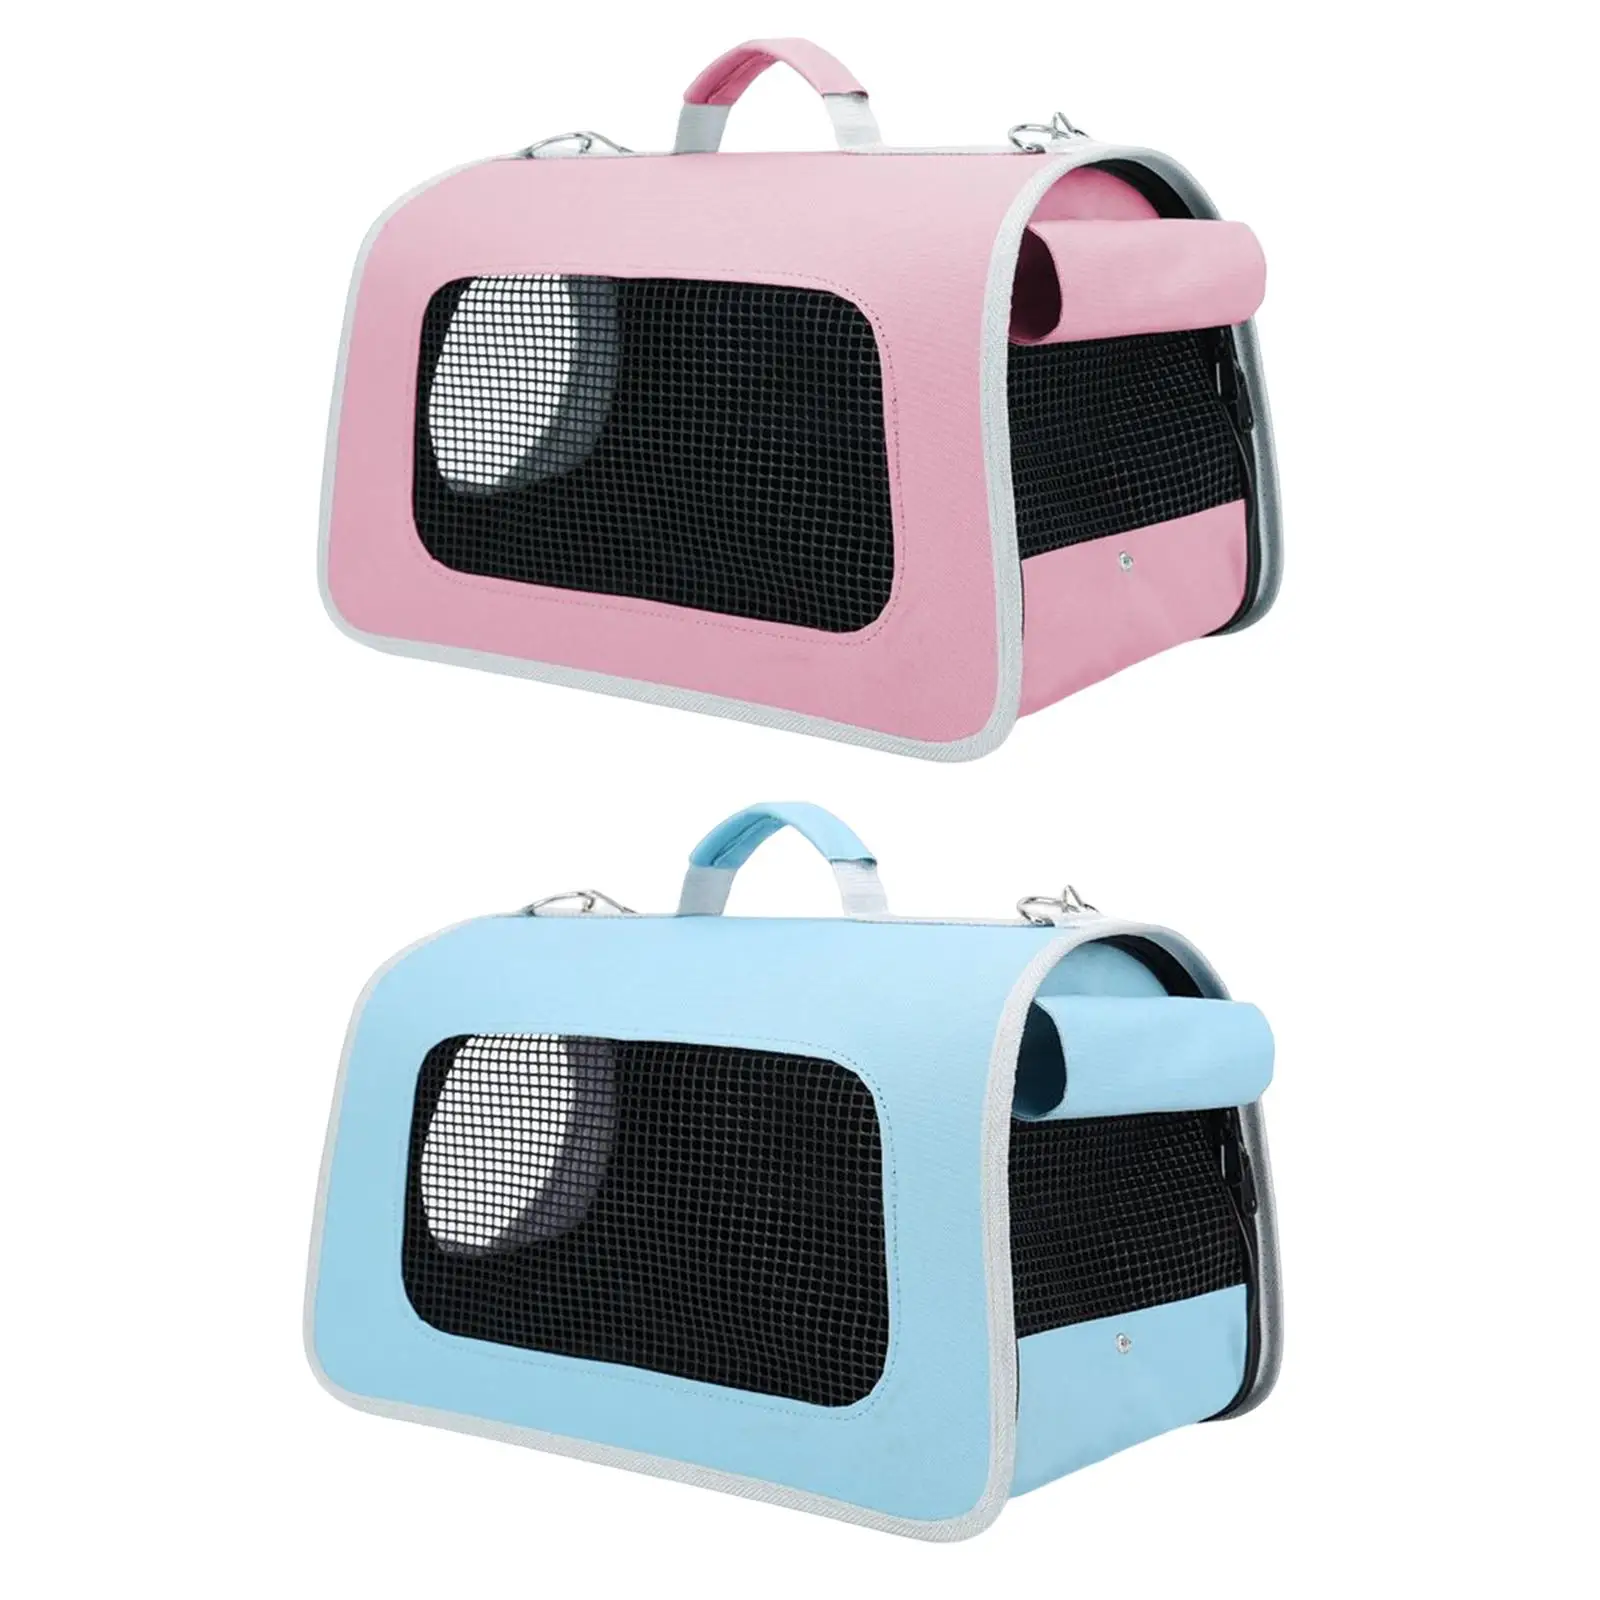 Portable Cat Carrier Pet Carrier Breathable Lightweight Pet Cage Carrying Case Carrying Bag for Cats Travelling Dogs Puppies